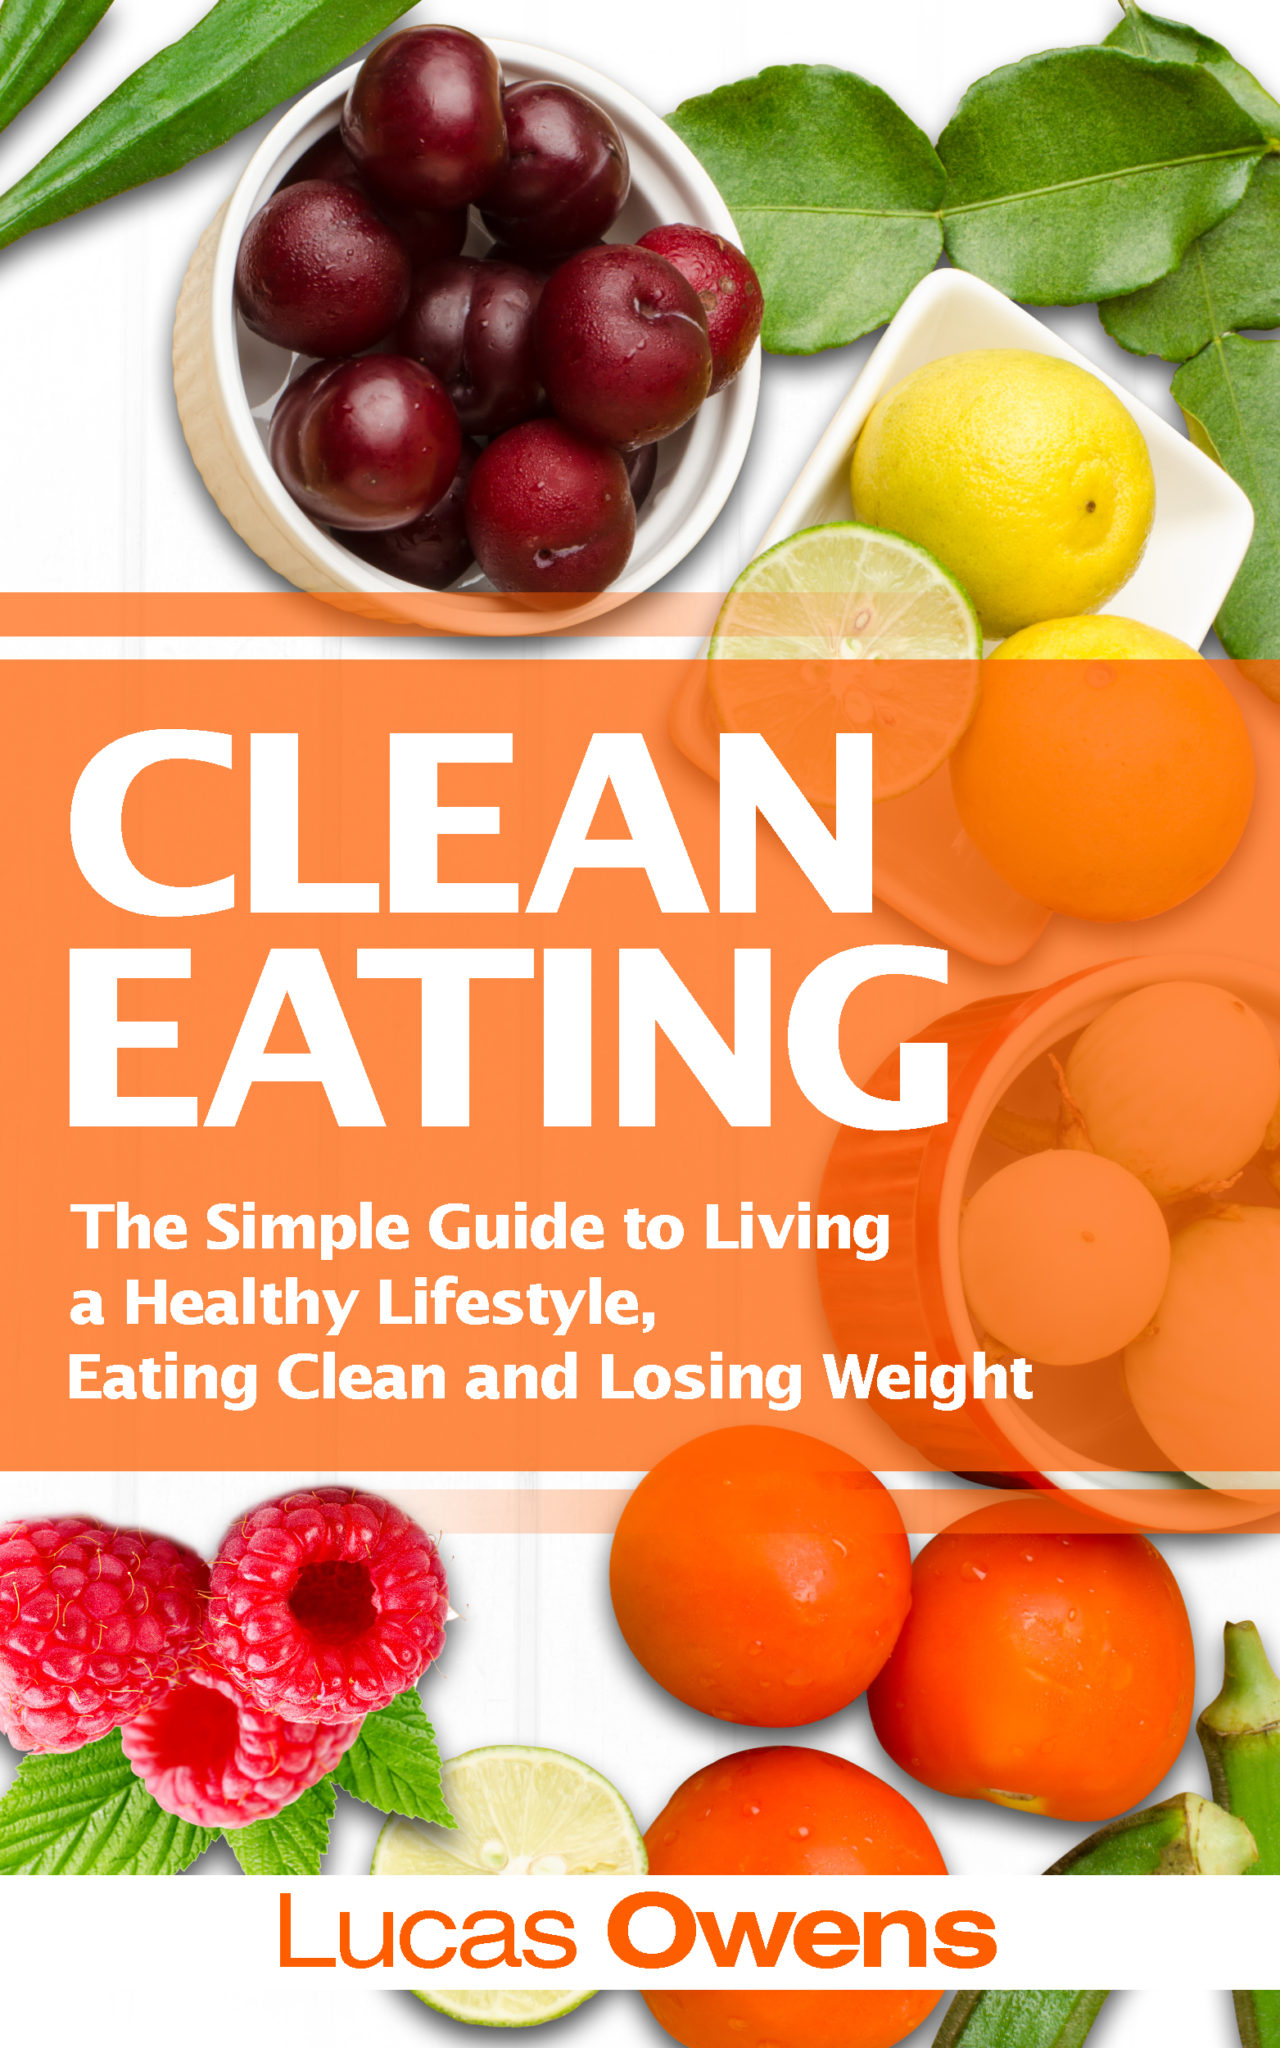 FREE: Clean Eating: The Simple Guide to Living a Healthy Lifestyle, Eating Clean and Losing Weight by Lucas Owens